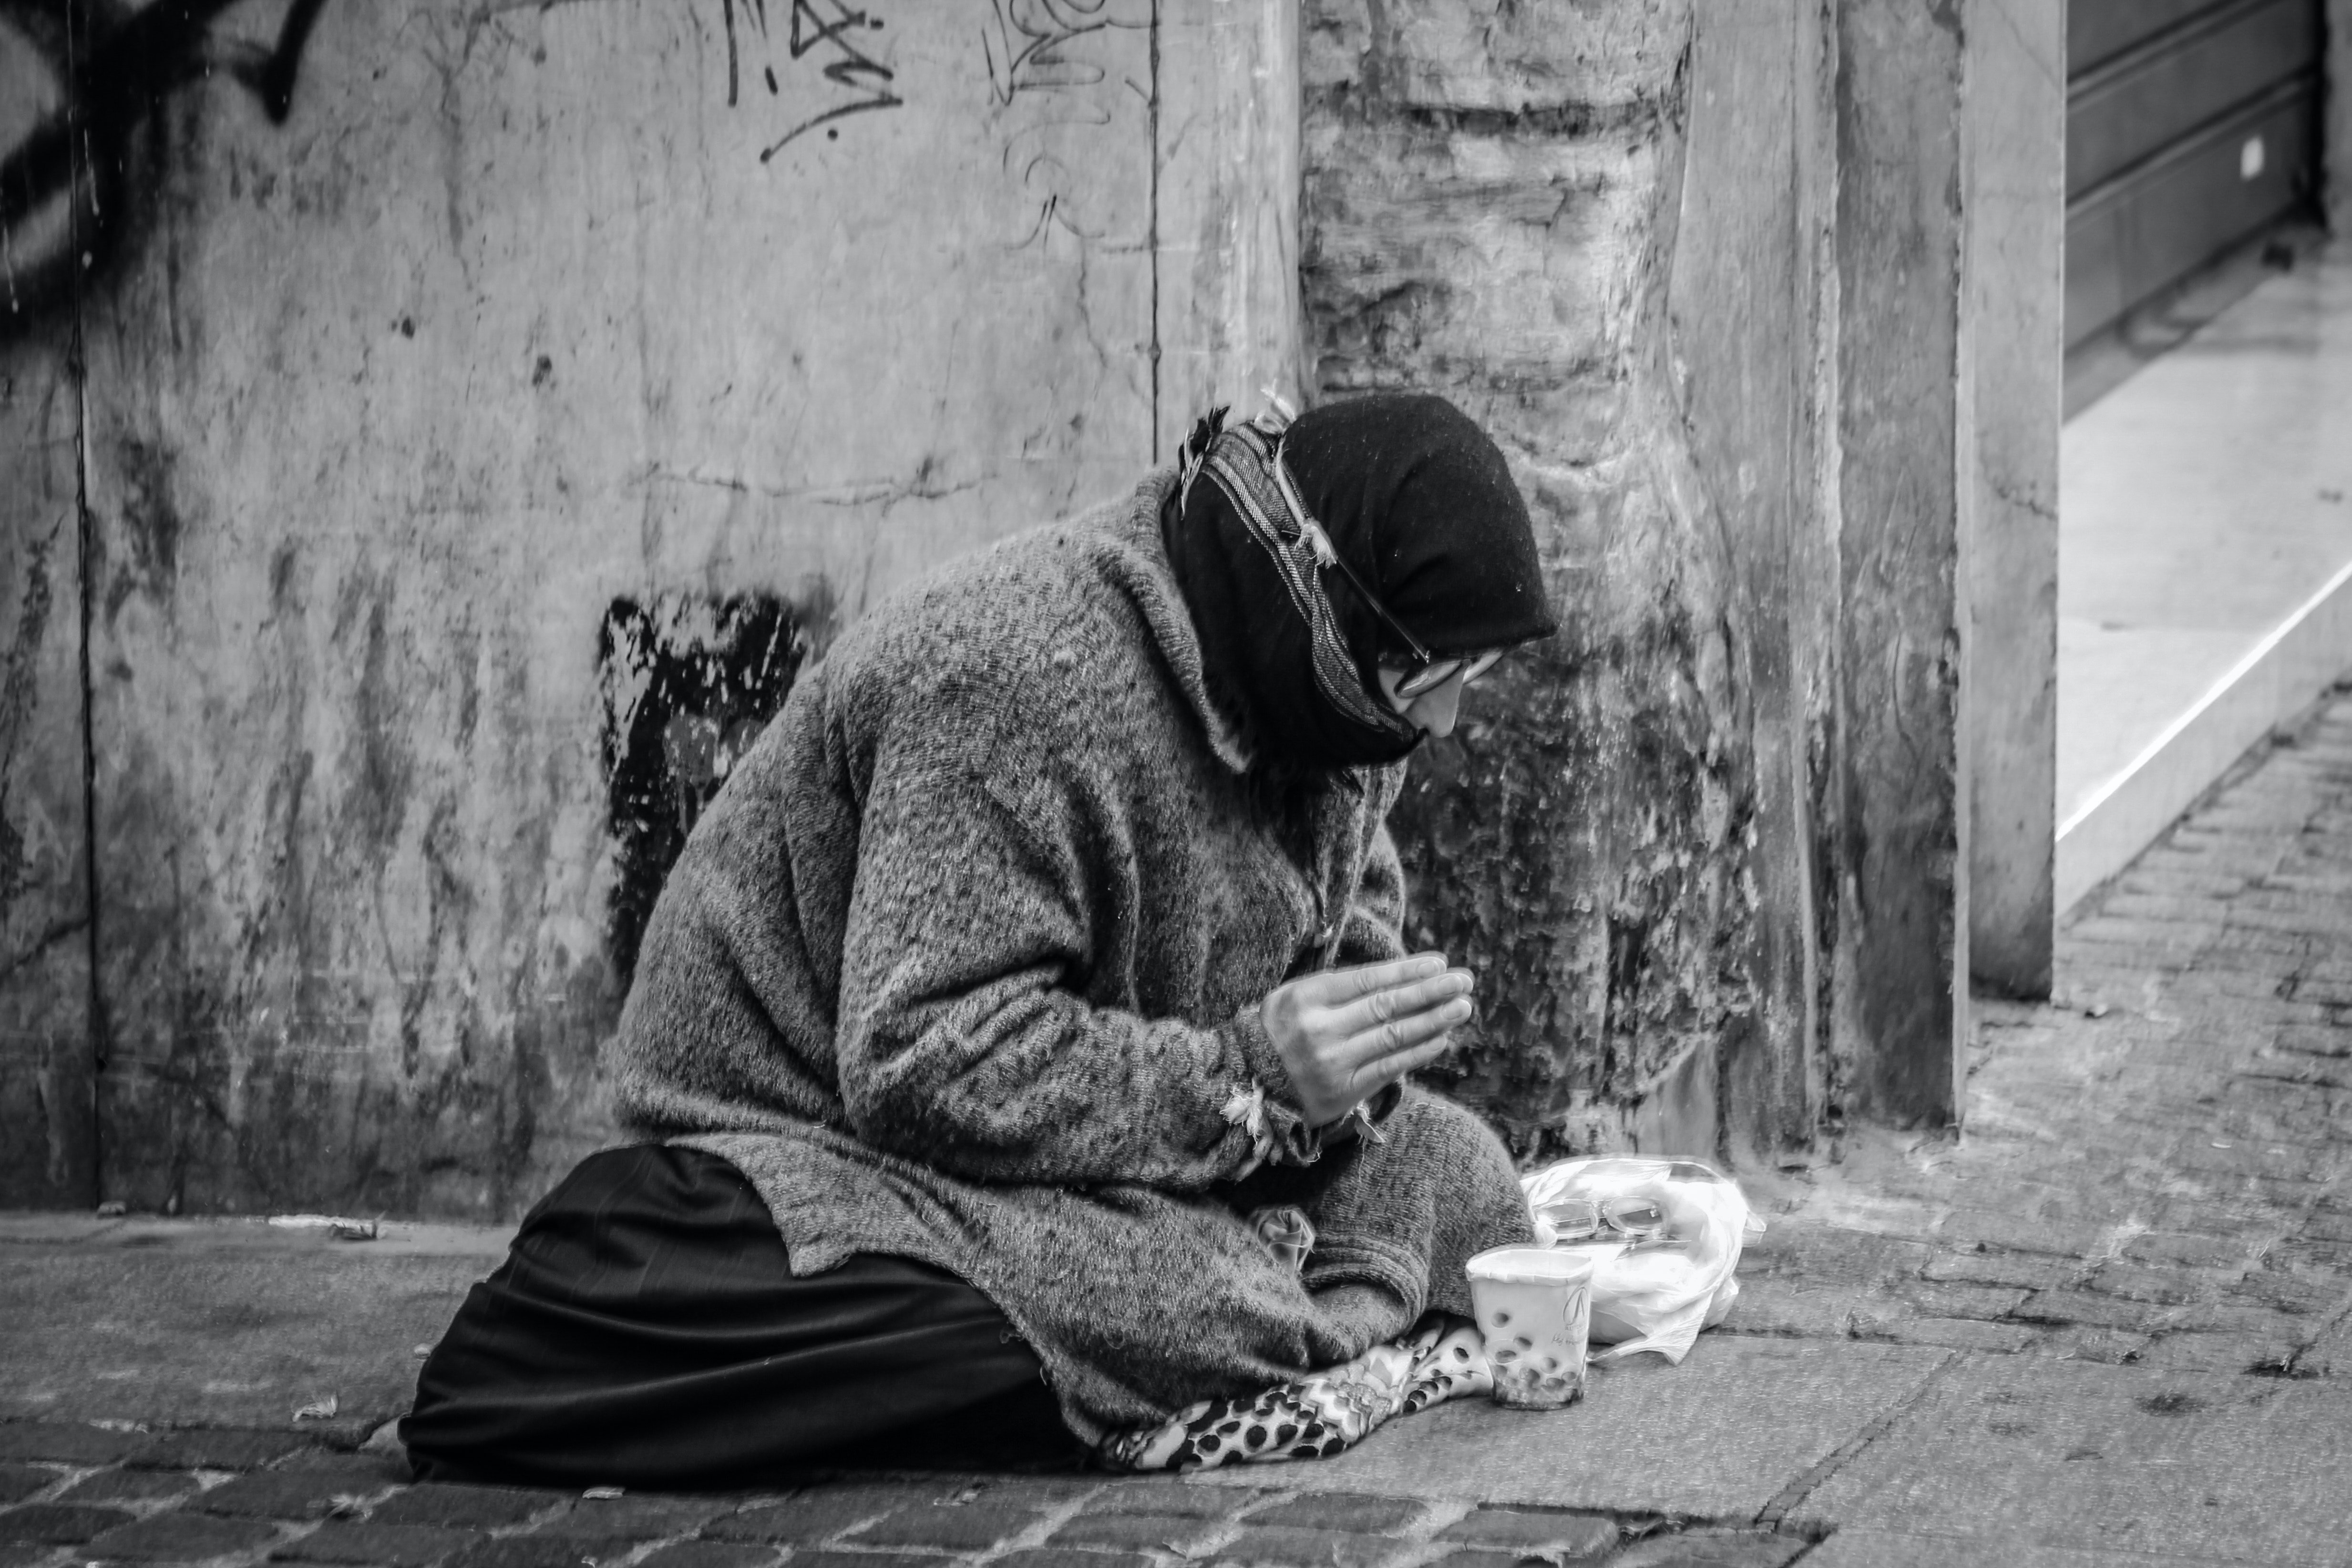 A homeless man on the street. | Pexels/ sergio omassi 